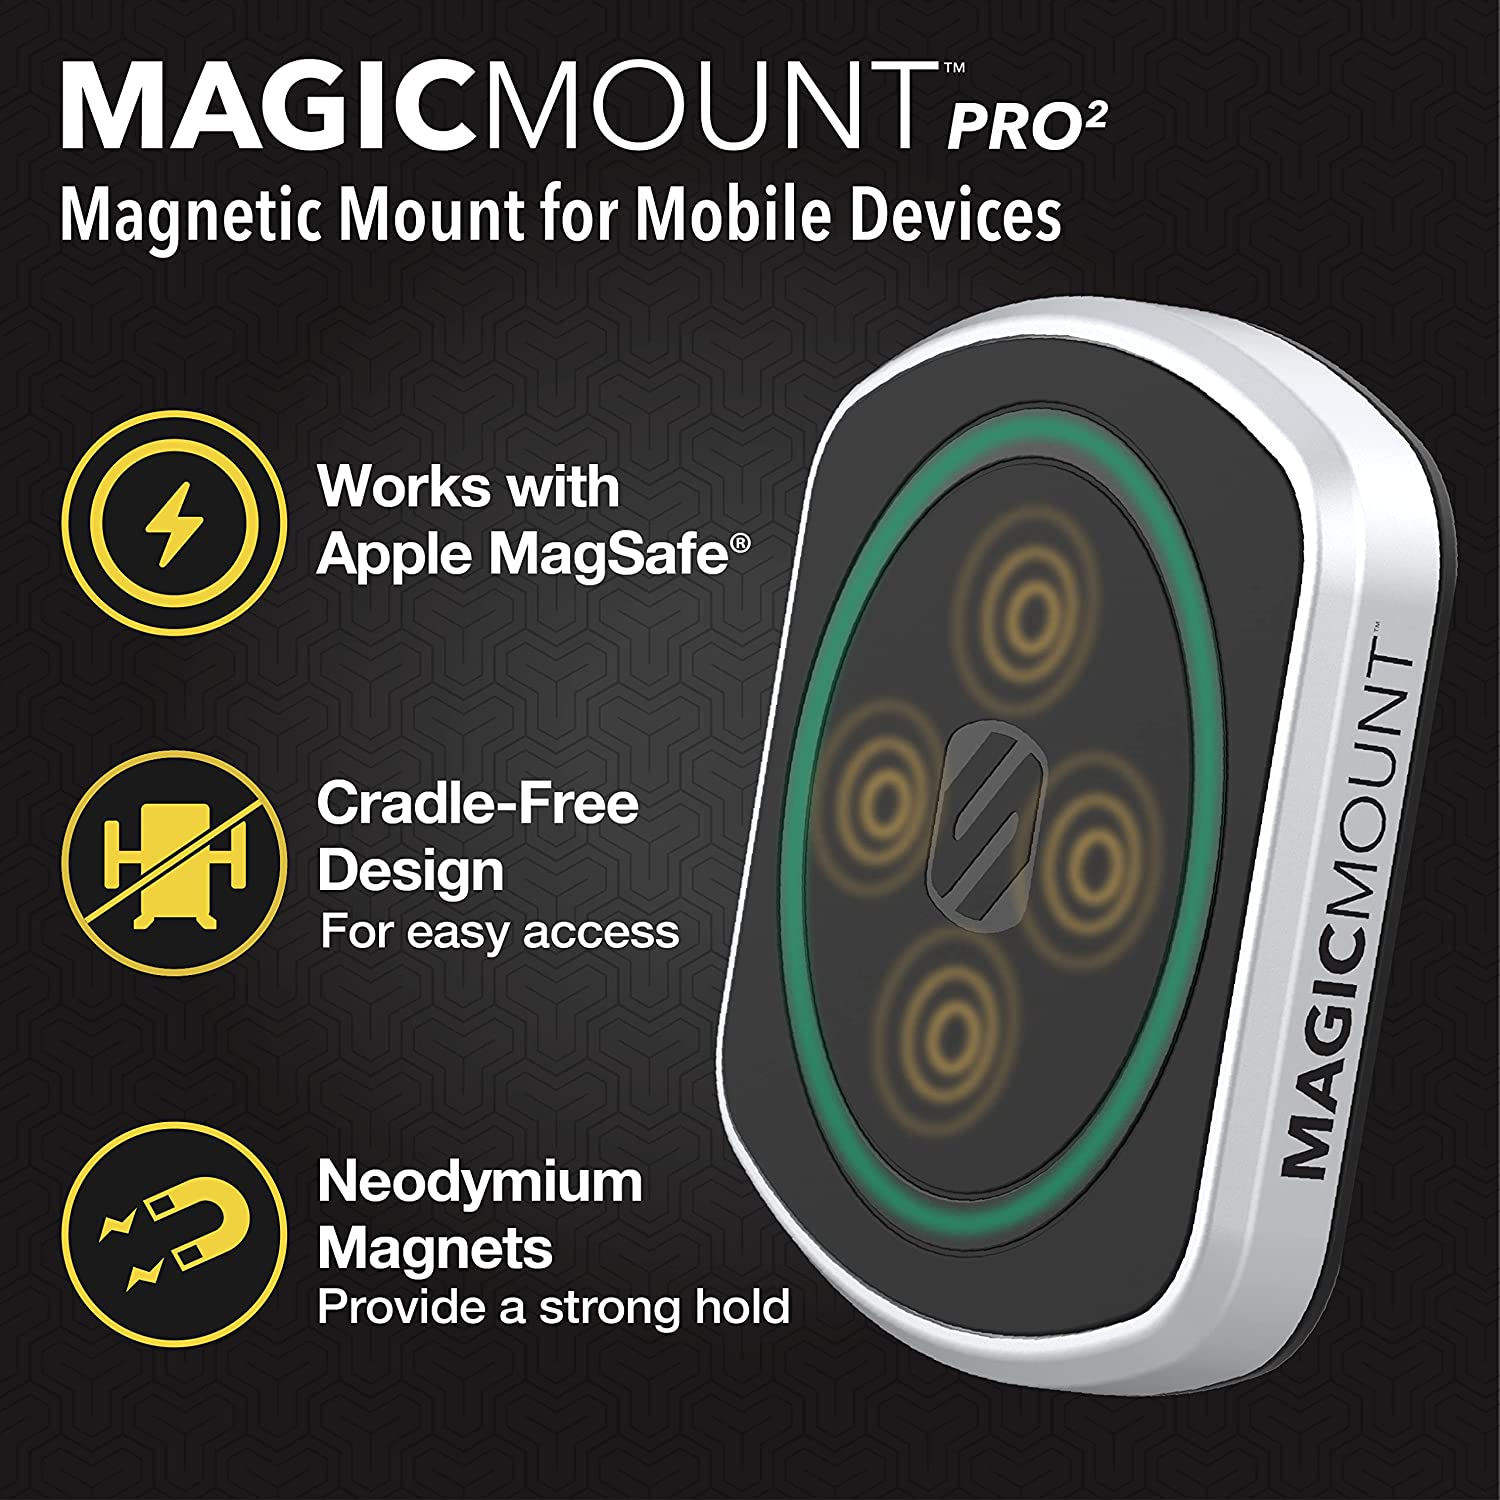 Scosche Pixel MagicMount Pro 2, Universal Magnetic Suction Cup Mount for Car MagSafe, iPhone, Galaxy, Home or Office